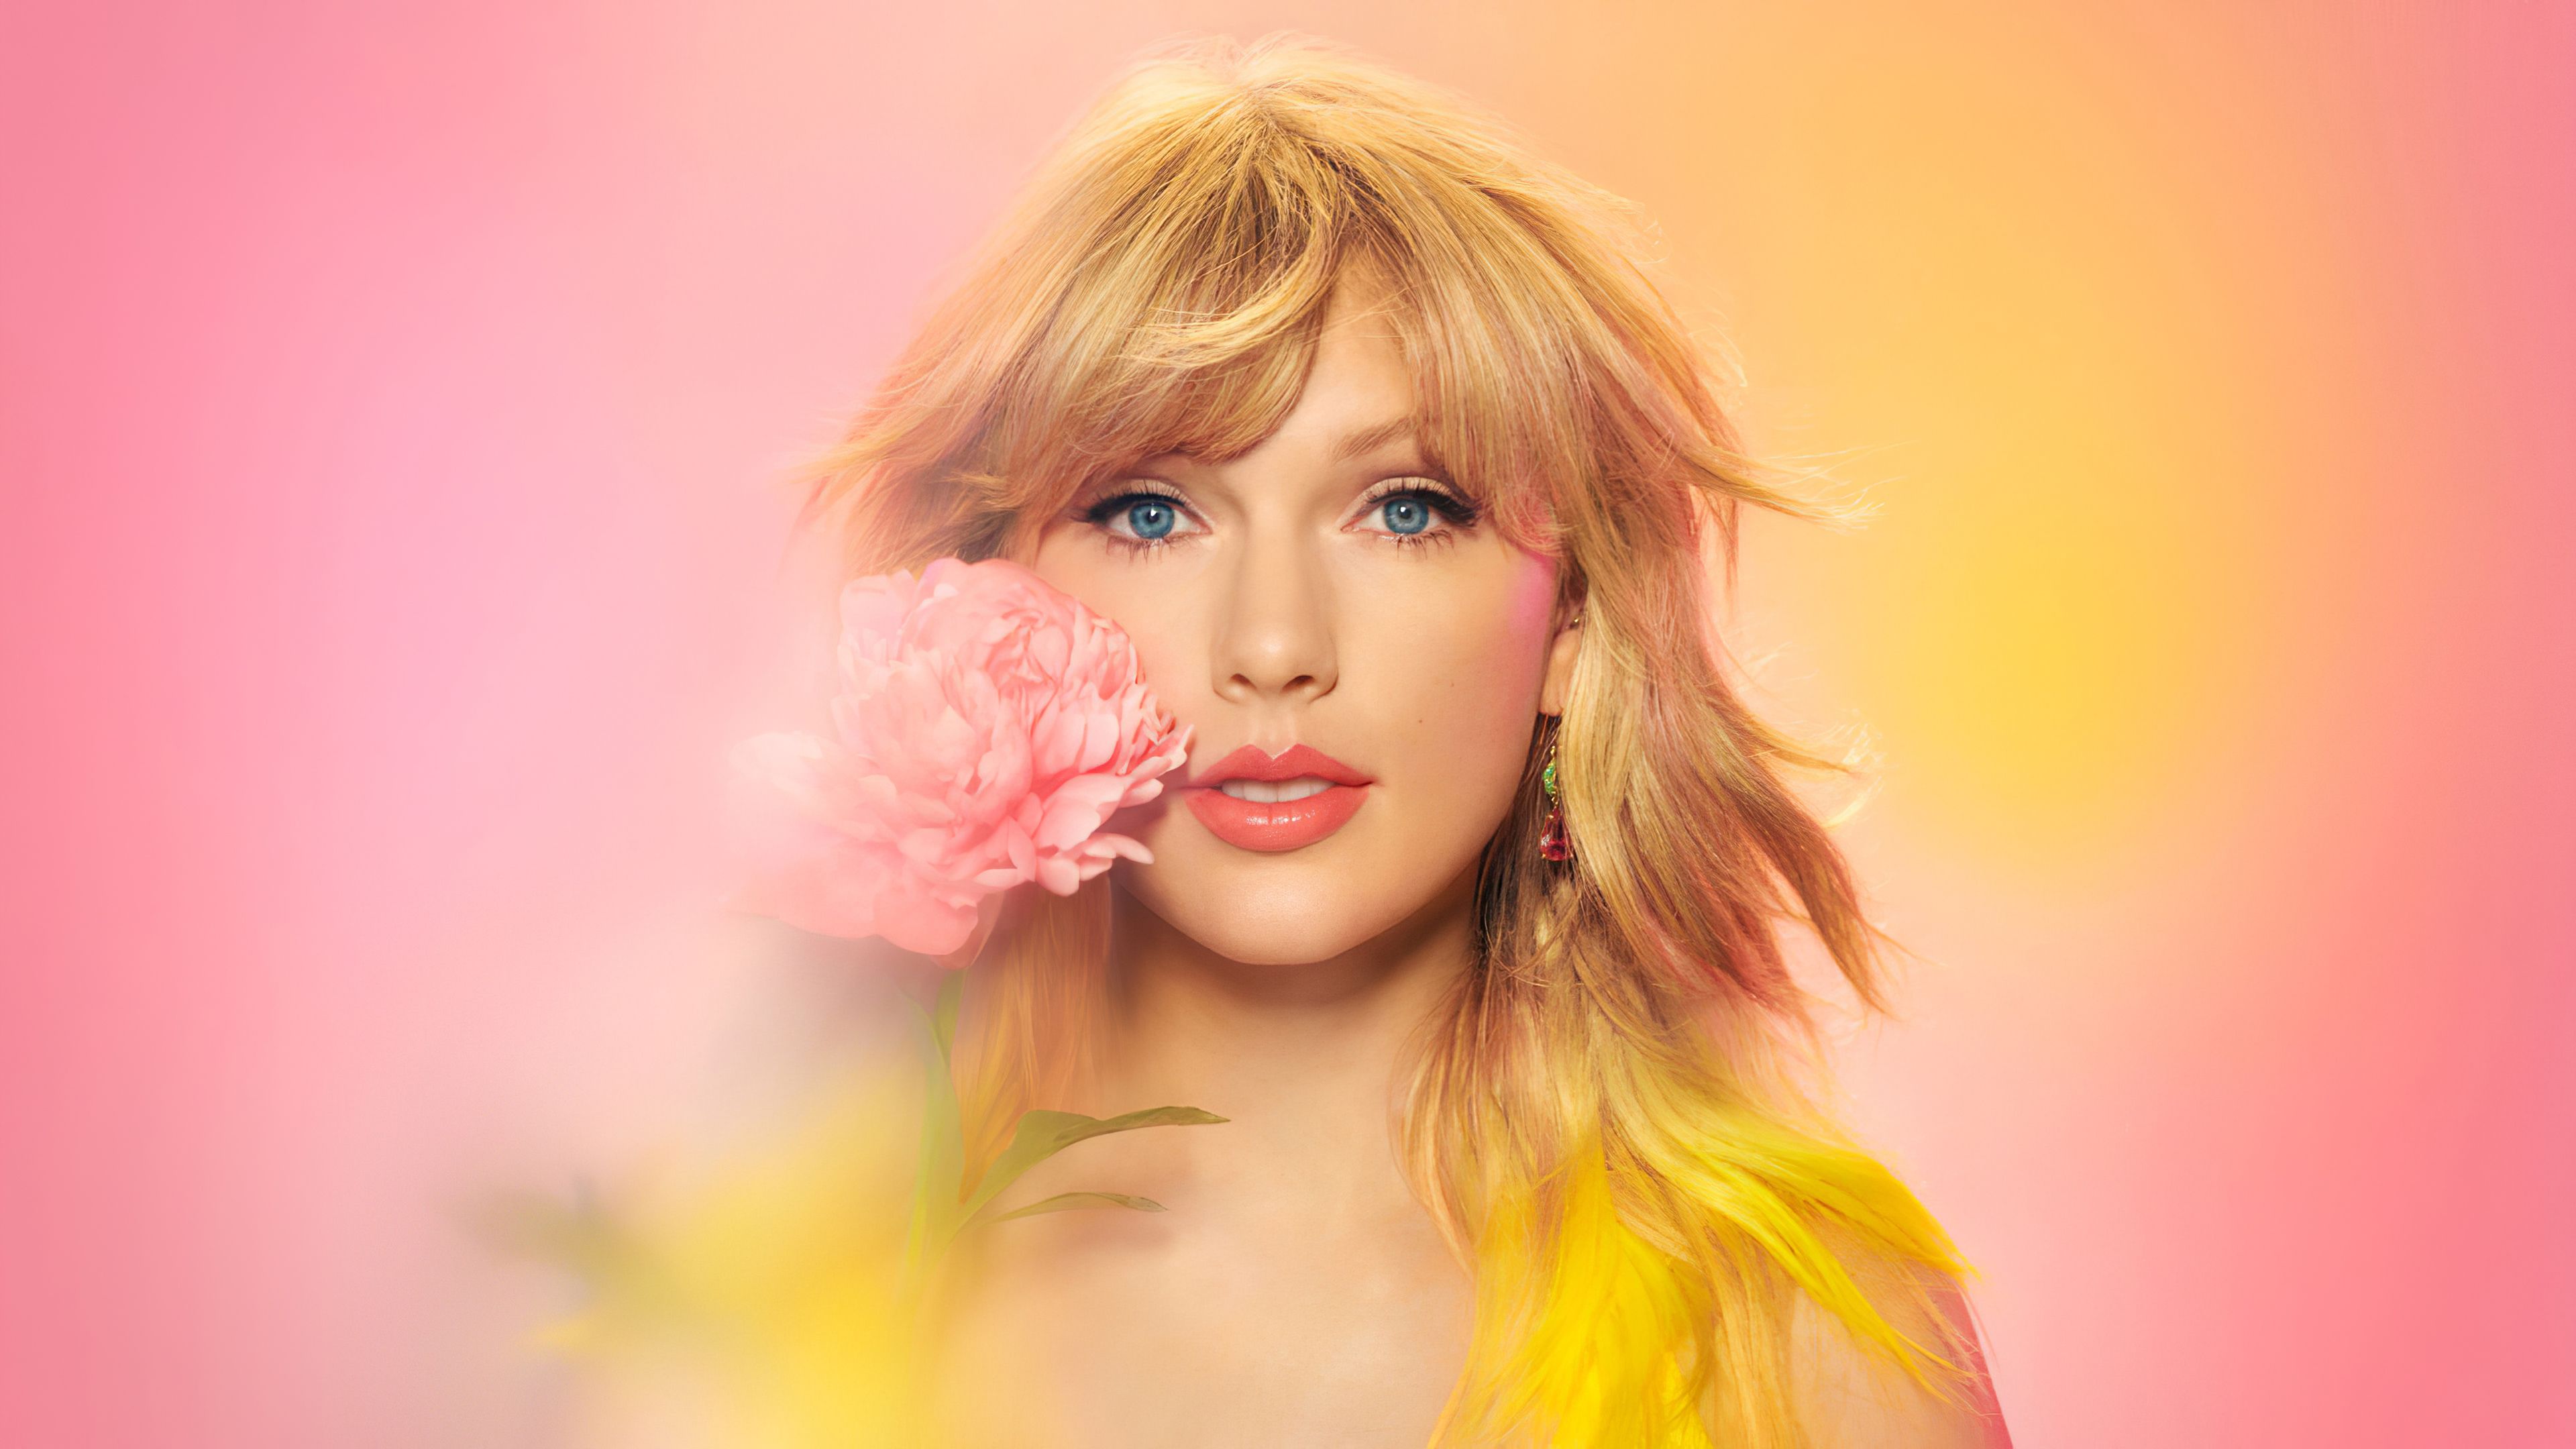 Taylor Swift PC Wallpapers - Wallpaper Cave